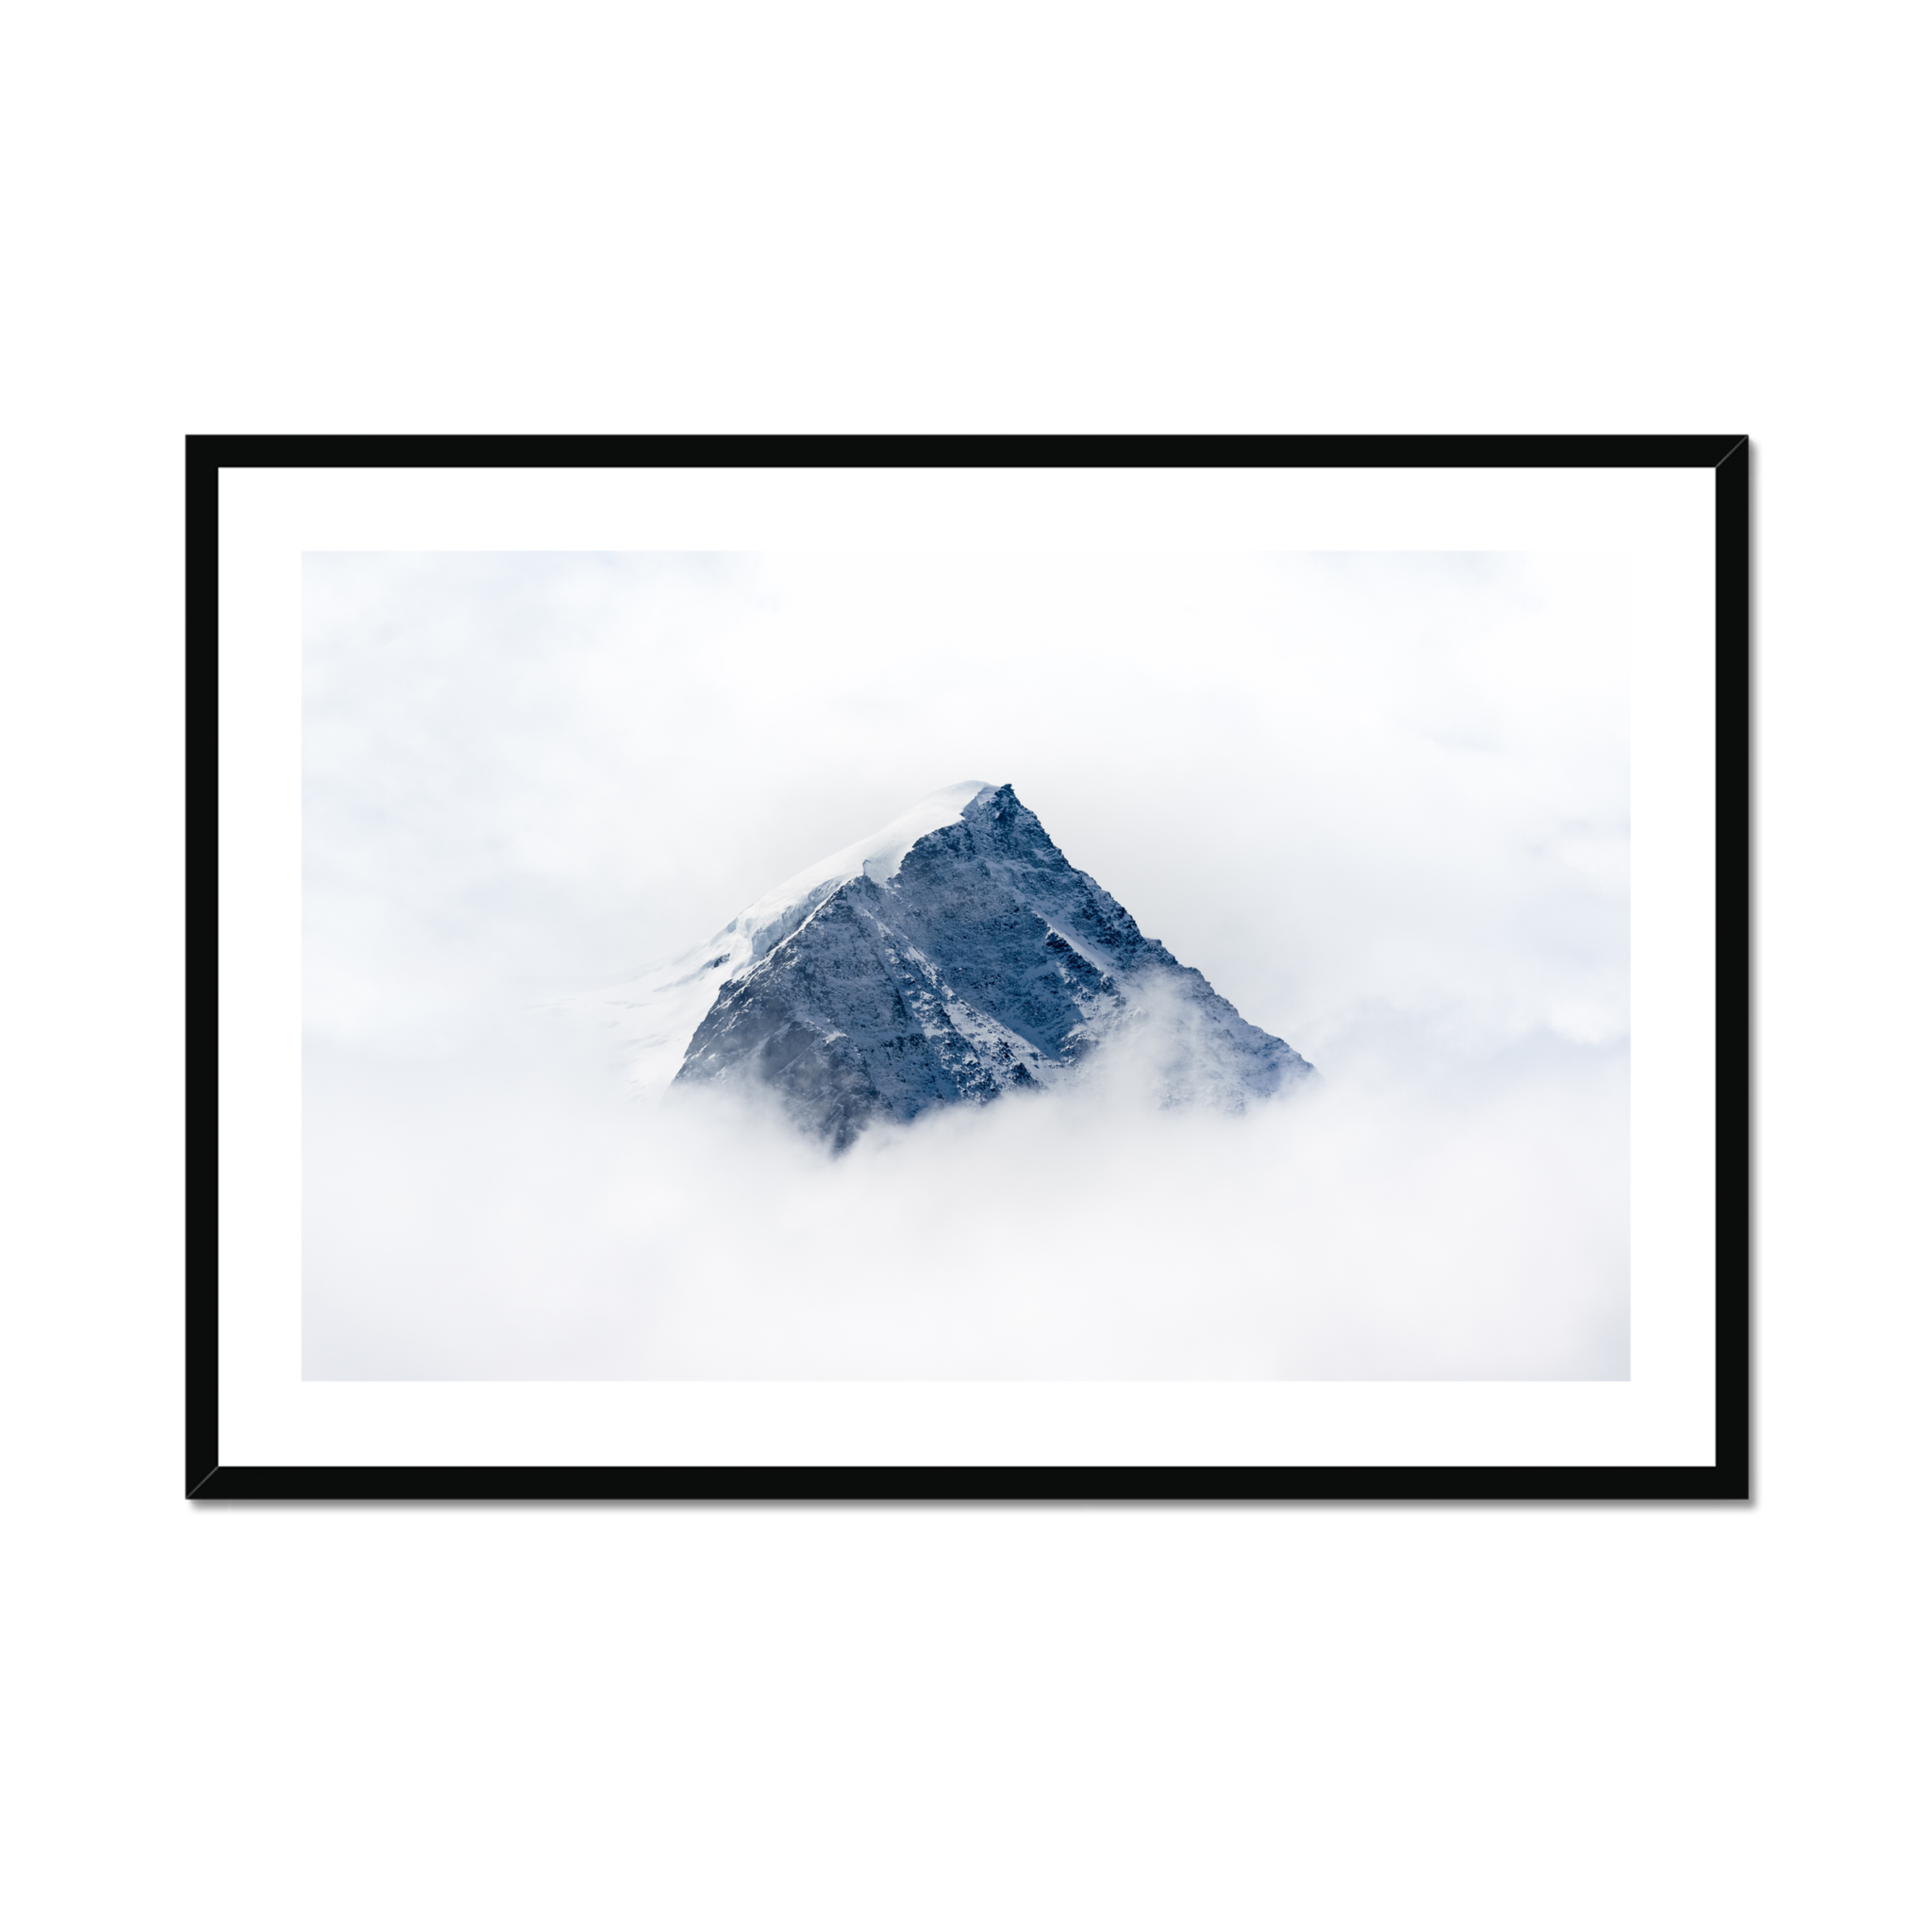 The image features a majestic, snow-capped mountain peak emerging from a dense layer of clouds against a pale sky, framed and ready for display.